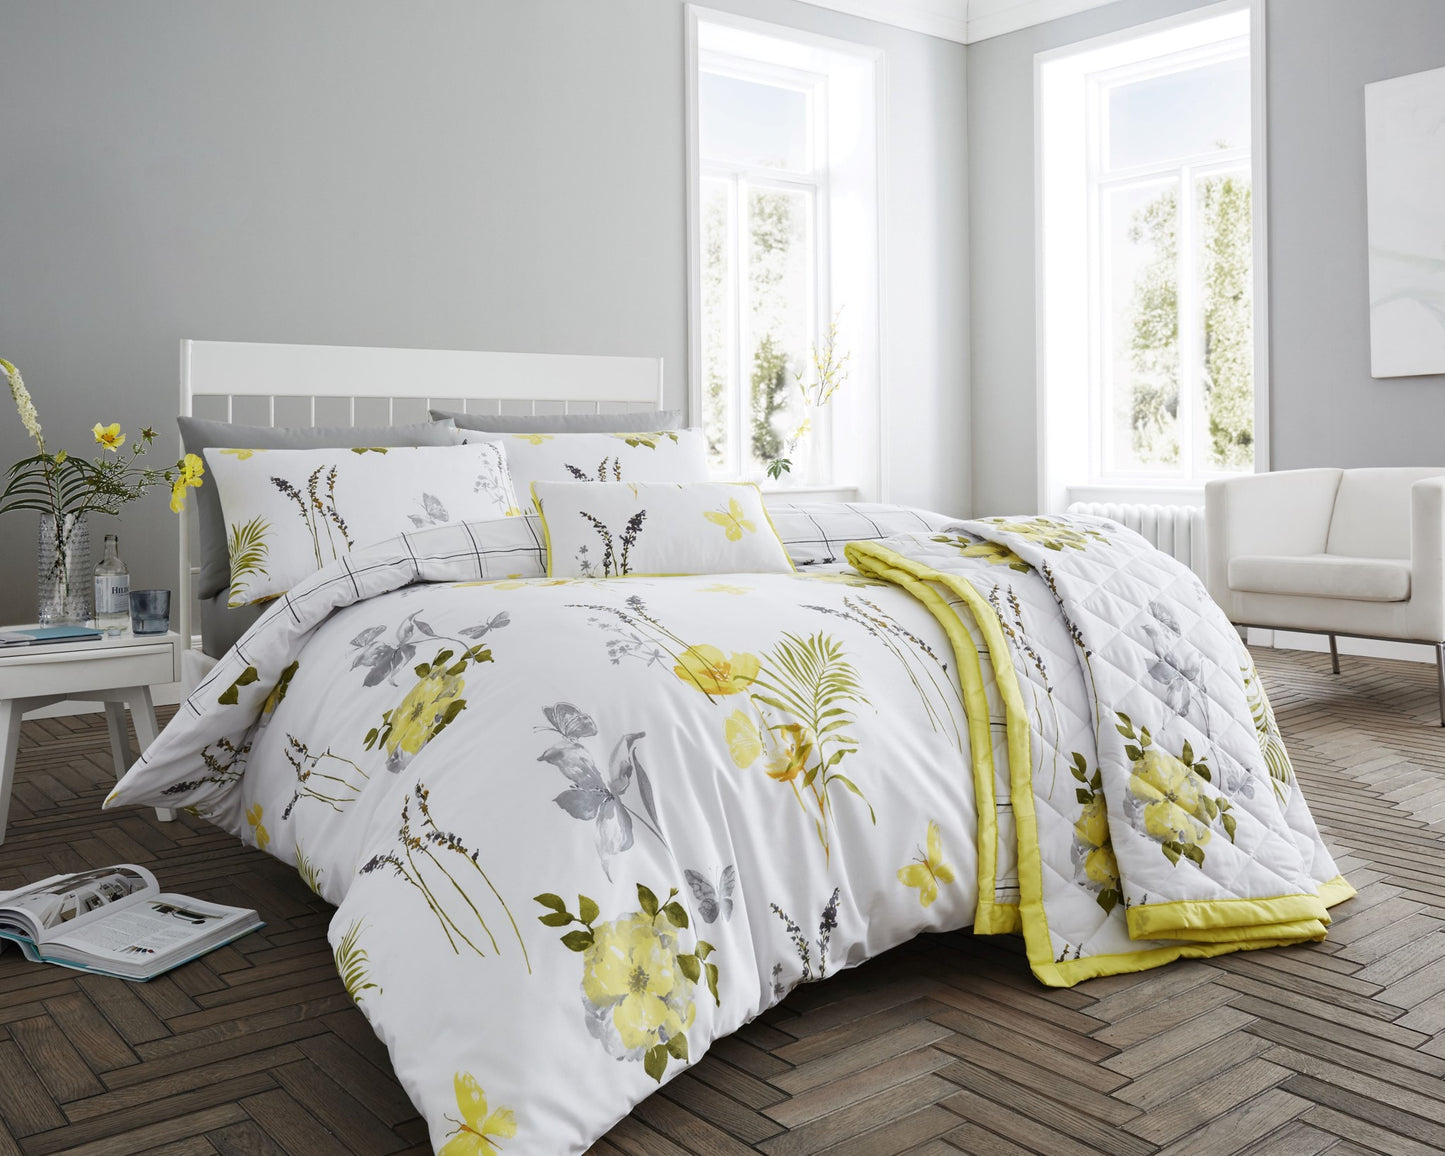 Inky yellow Reversible Paisley Striped All Season Quilt Set. lemon yellow Quilt Coverlet Bed Set Kadi Collection